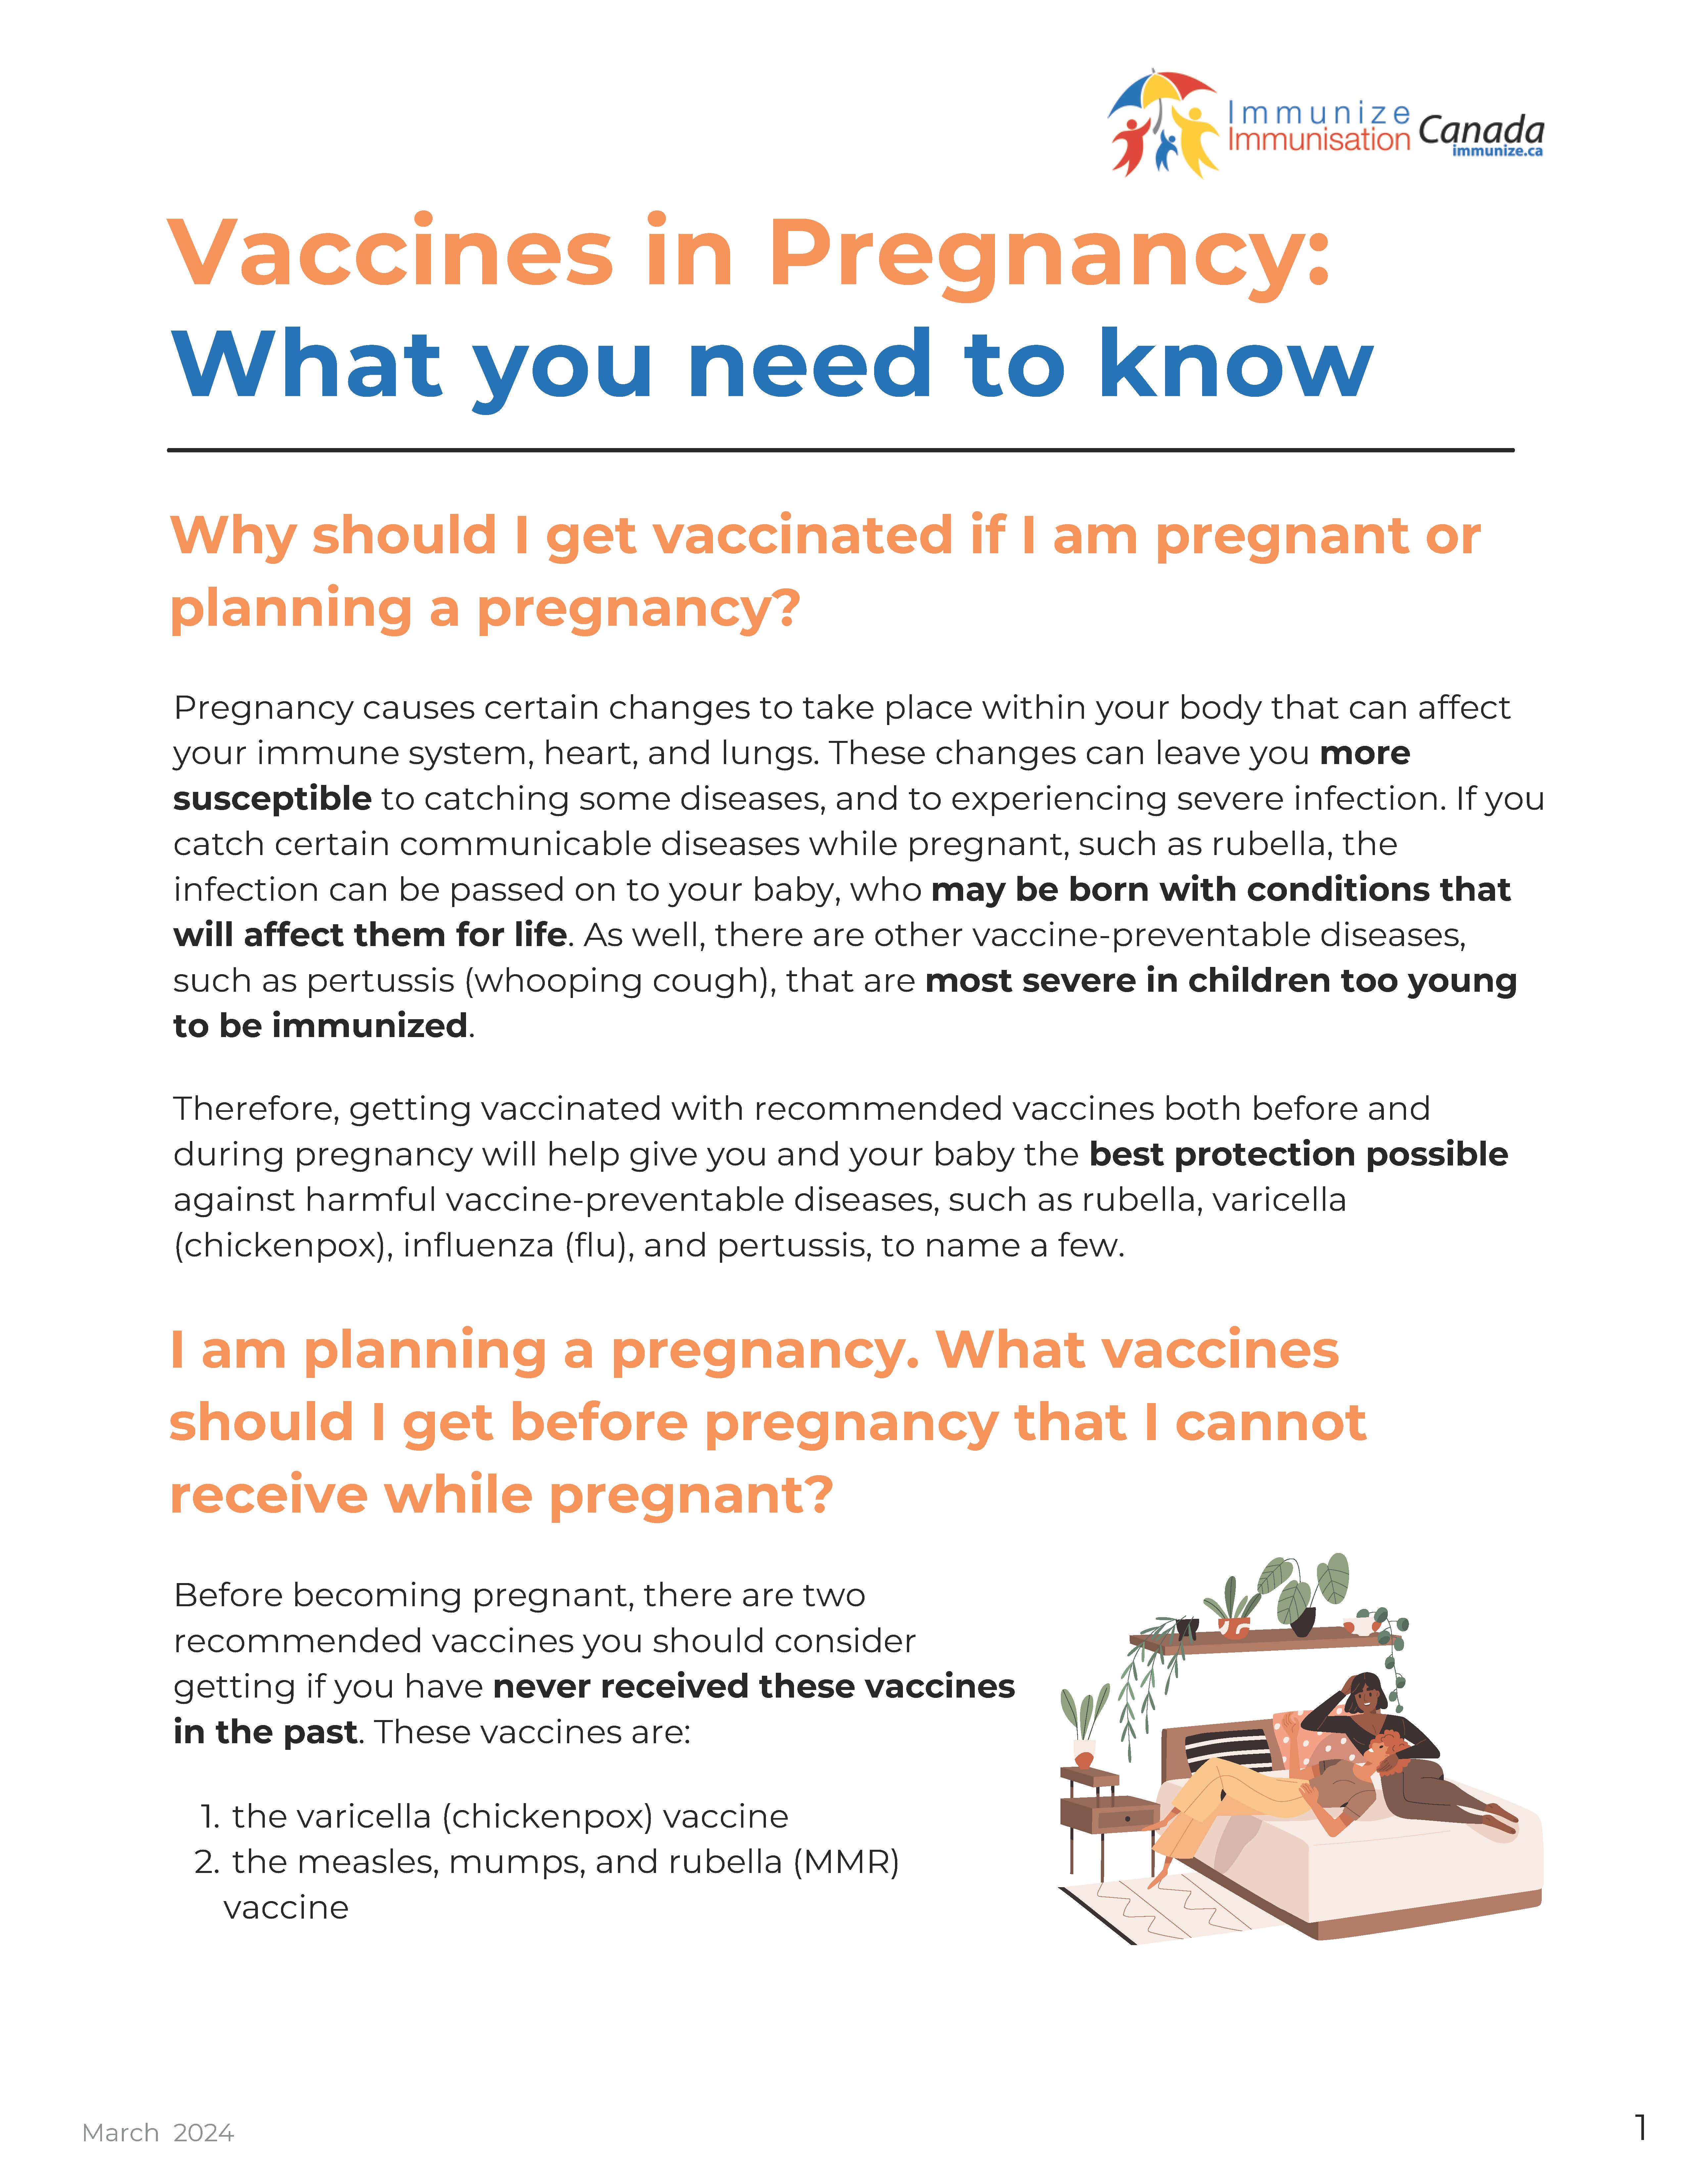 Vaccines in Pregnancy: What you need to know (factsheet)